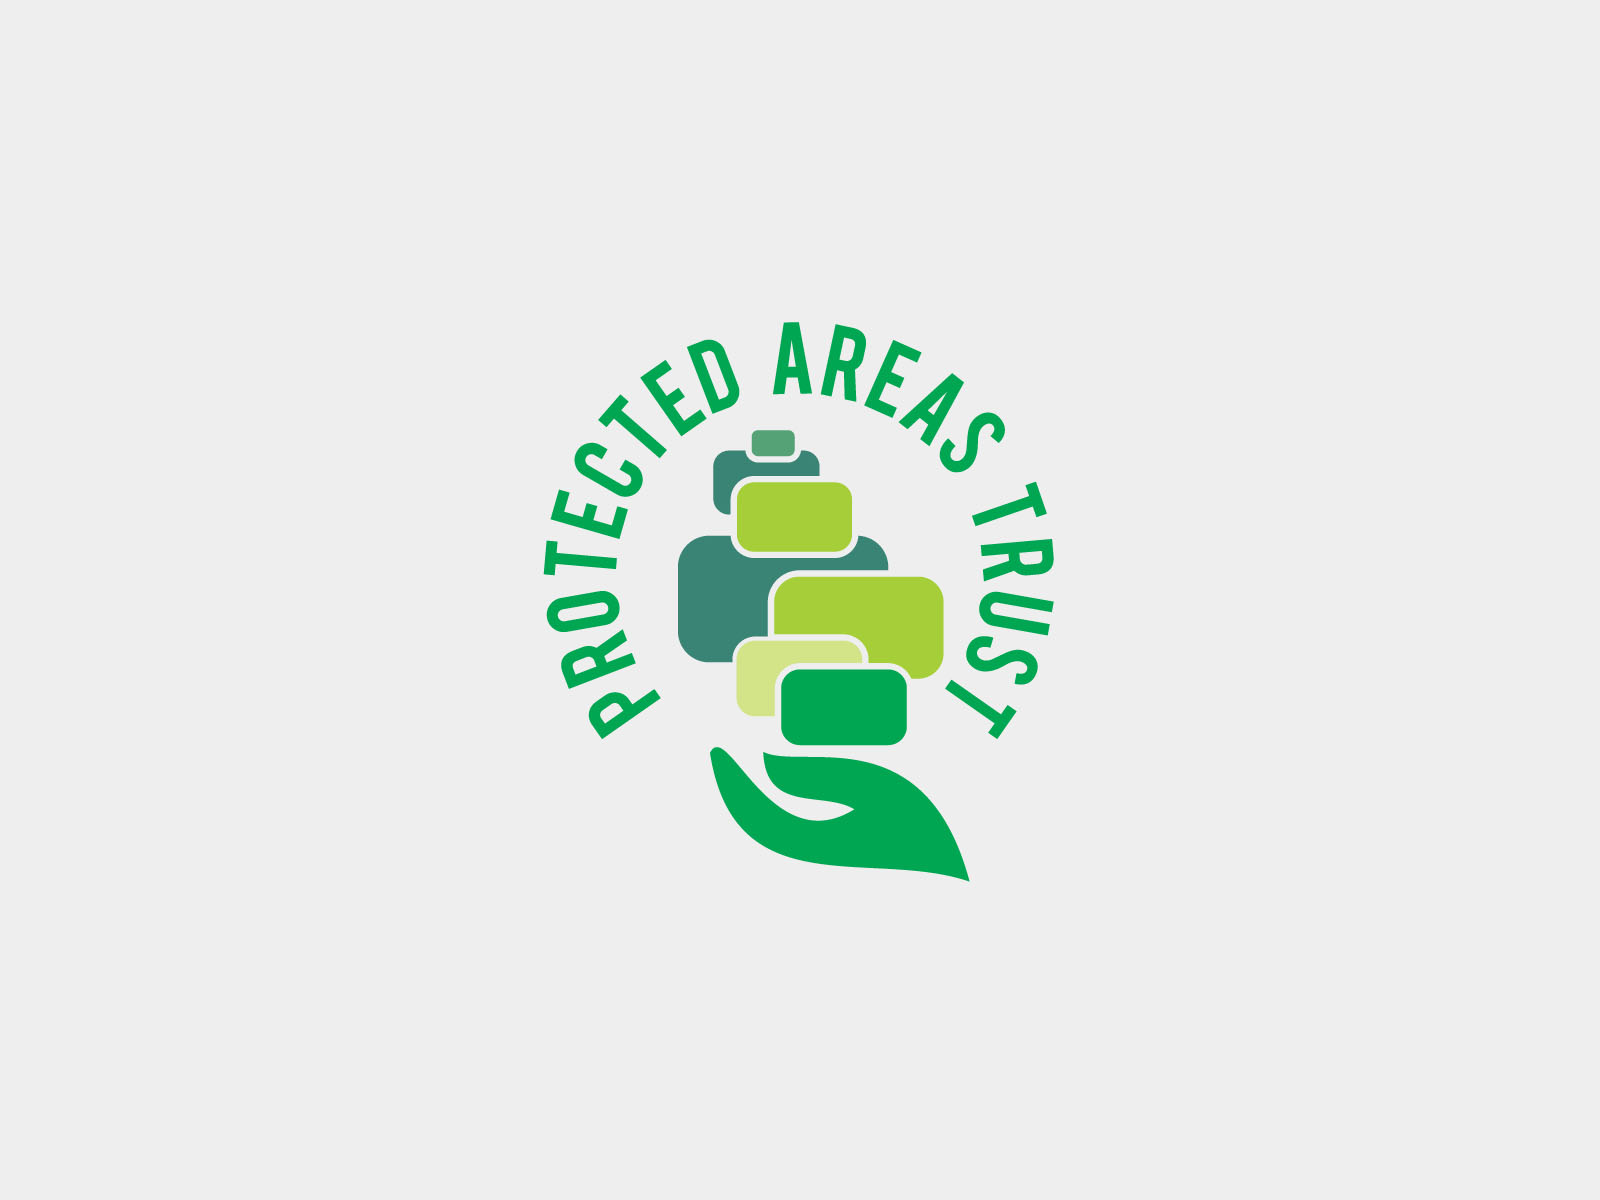 Protected Areas Trust